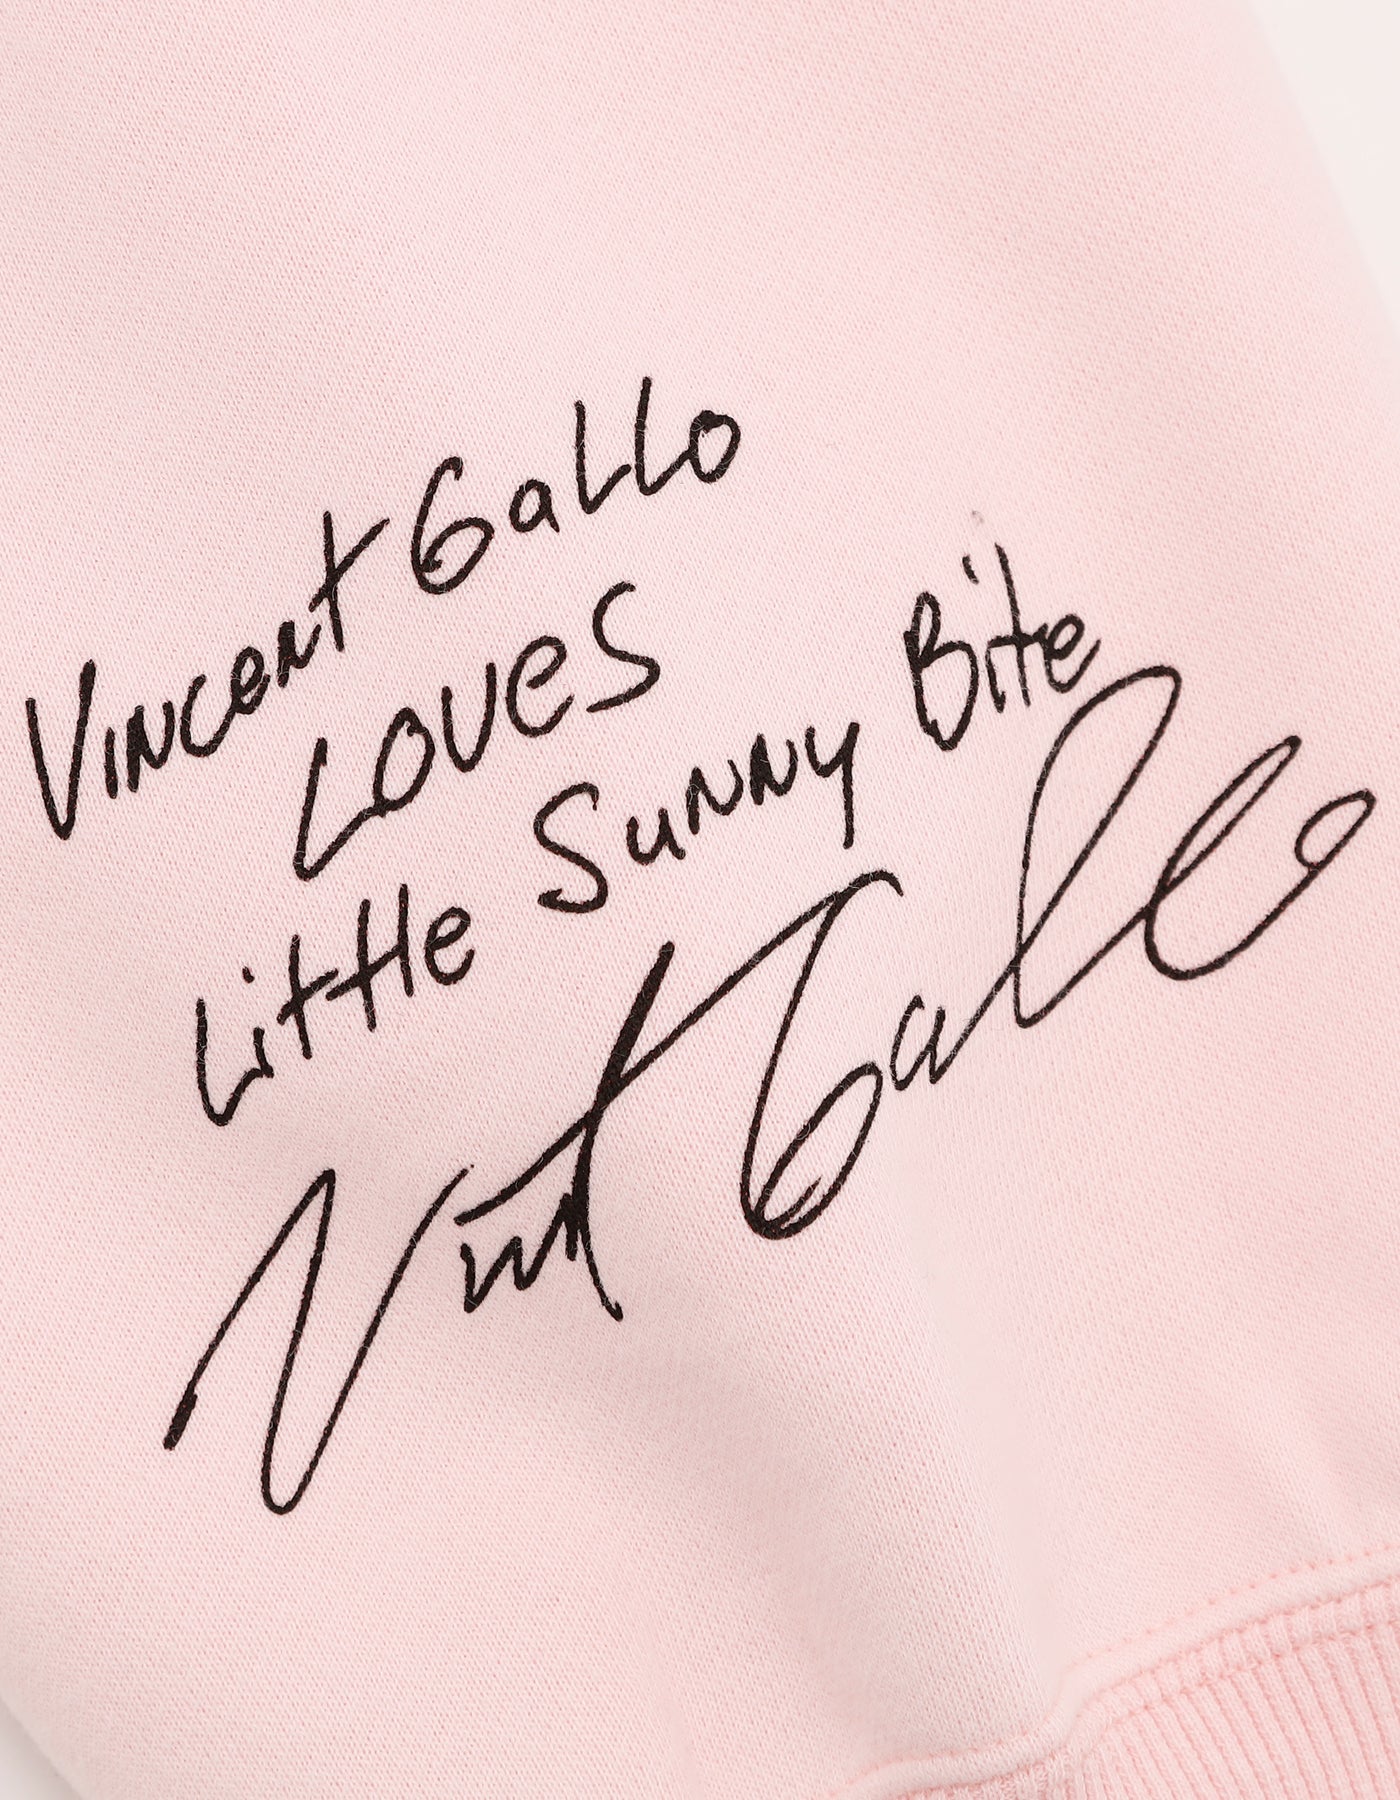 Vincent Gallo x little sunny bite face photo sweat top / PINK